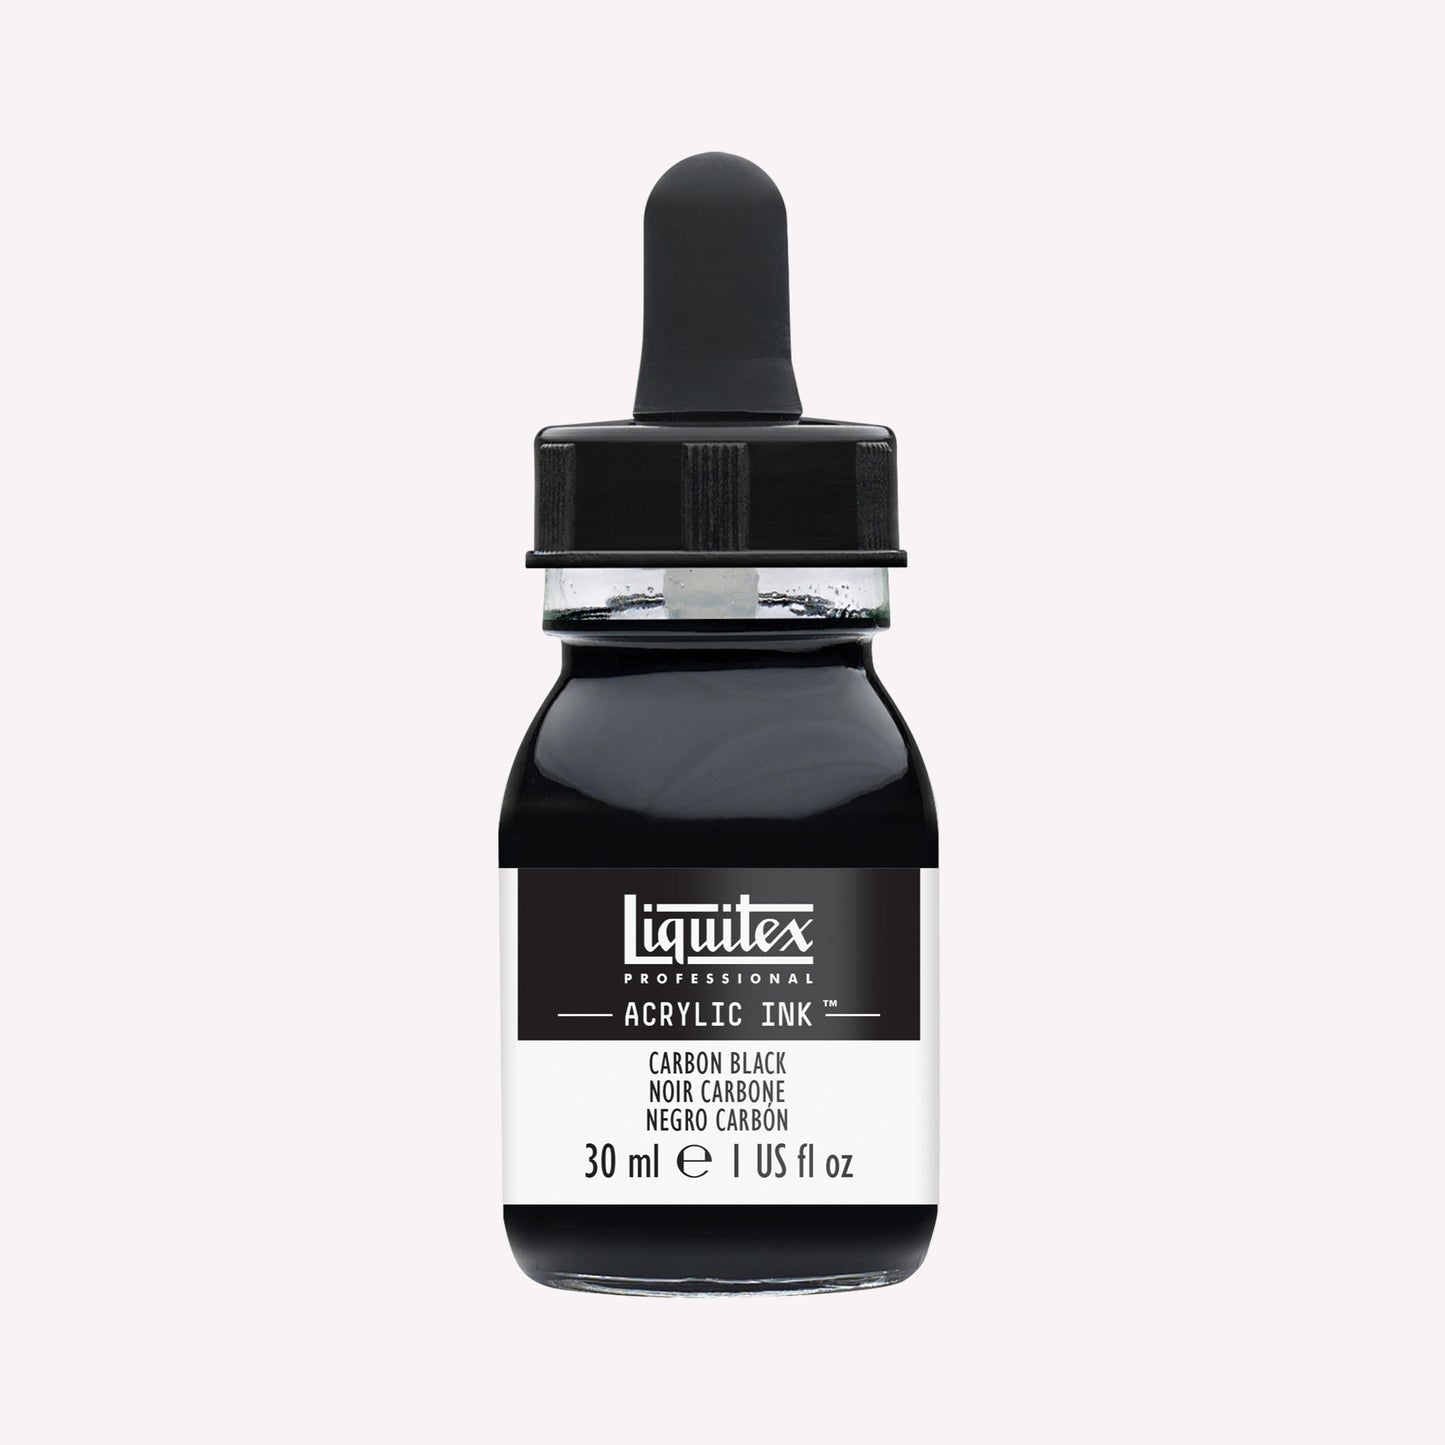 A 30ml glass jar of highly pigmented, artist-quality acrylic ink in the shade Carbon Black with a pipette lid. Made by Liquitex. 